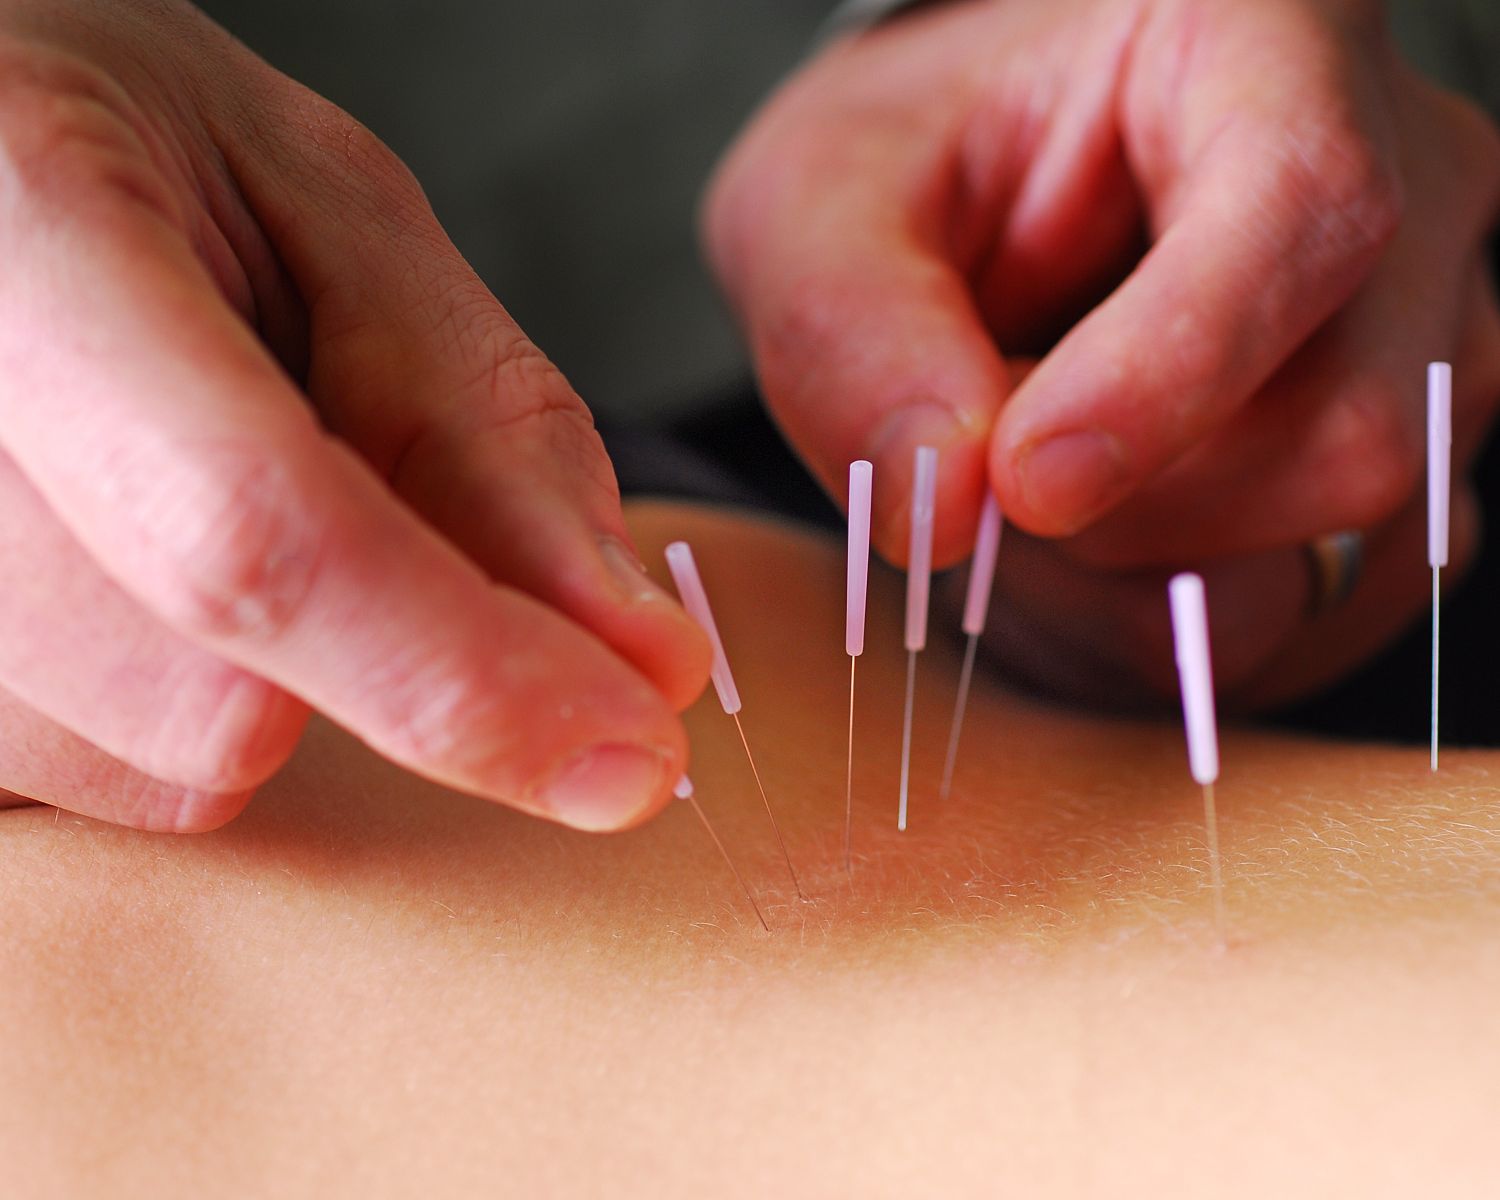 Treloar-physiotherapy-clinic-IMS-dry-needling-acupuncture.